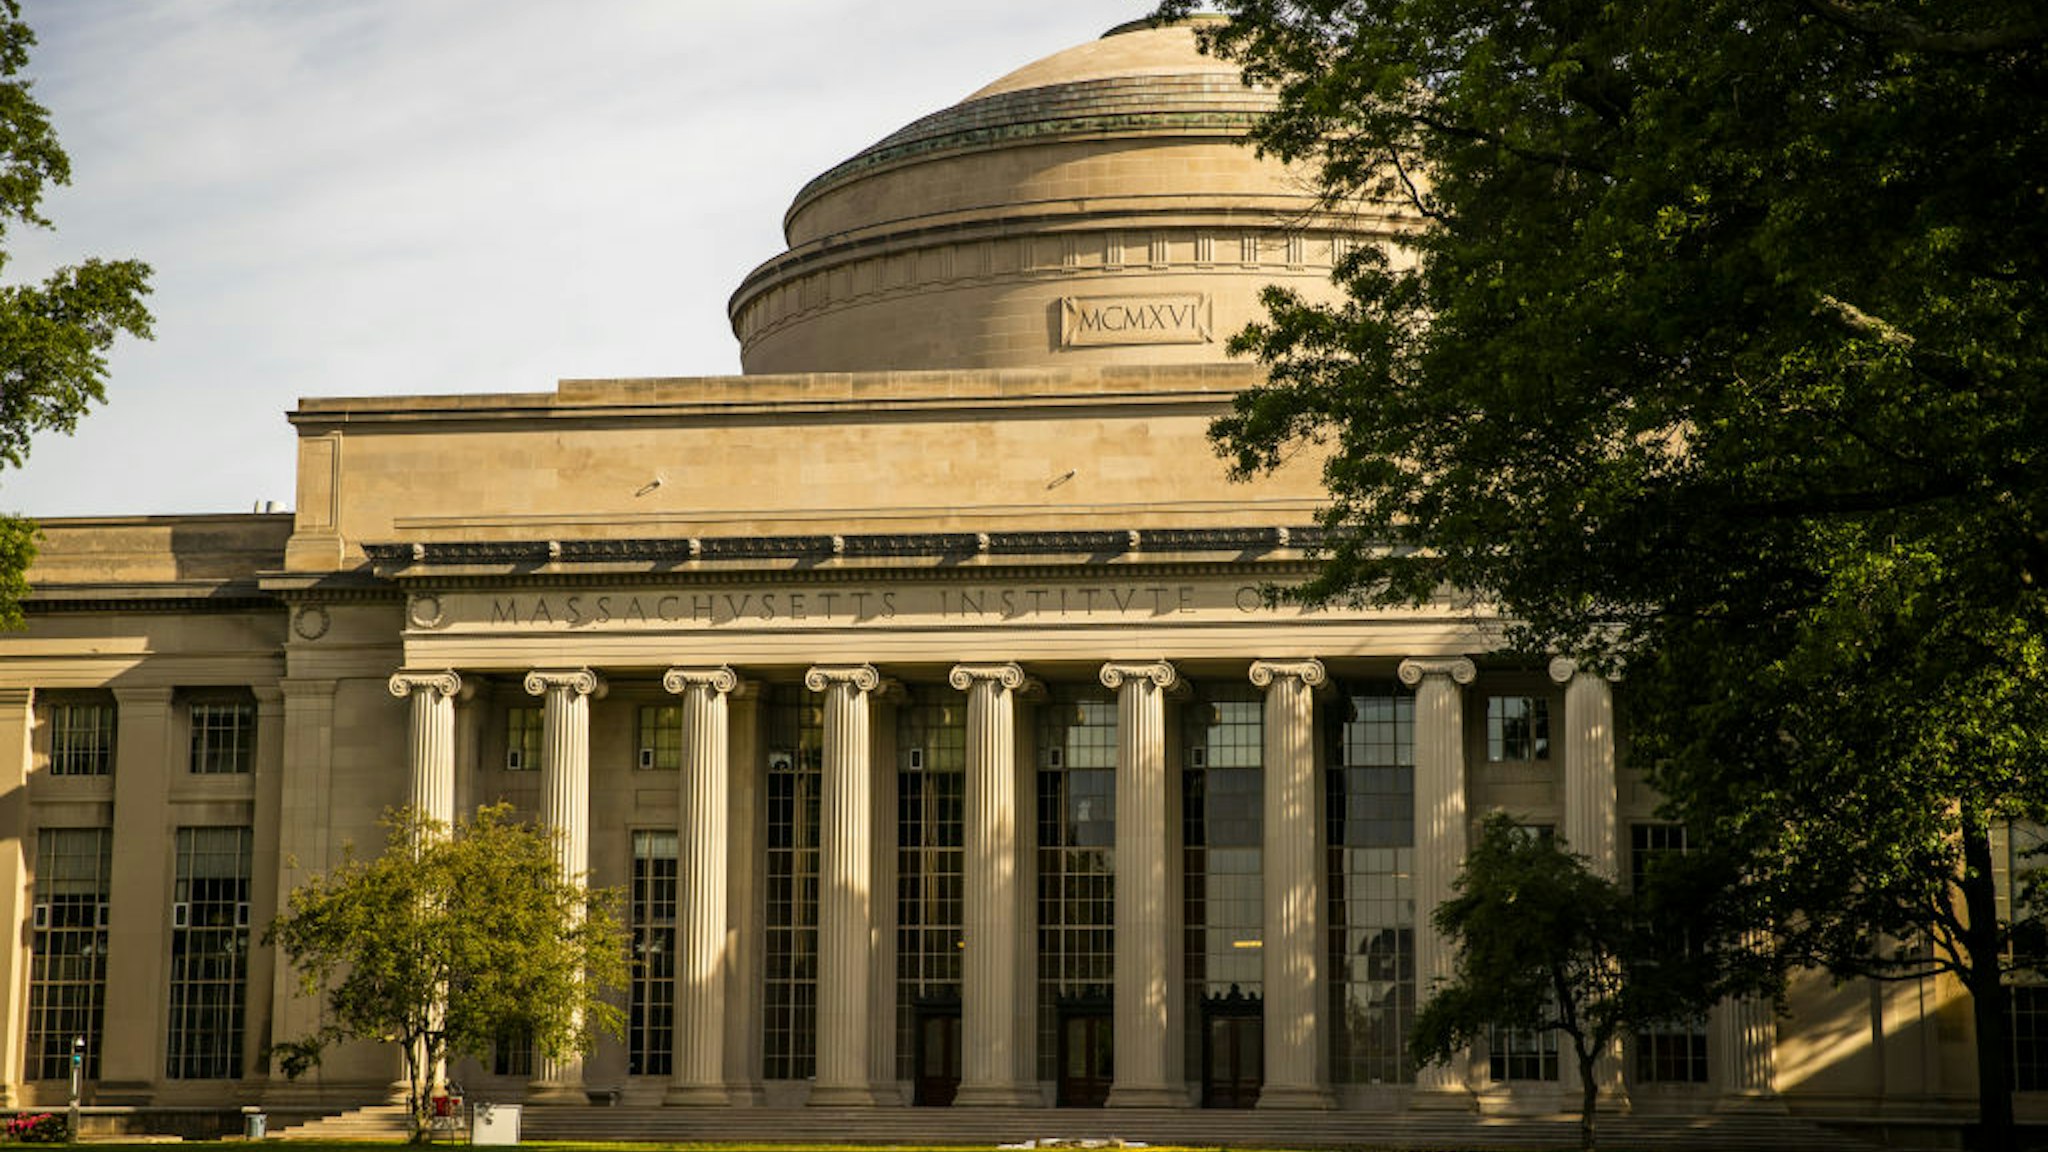 he Great Dome on Killian Court at the Massachusetts Institute of Technology (MIT) campus in Cambridge, Massachusetts, U.S., on Wednesday, June 2, 2021. In 2014, every undergraduate on the Massachusetts Institute of Technology campus had the chance to claim fractional ownership of a Bitcoin in an experiment referred to as the MIT Bitcoin Project. Photographer: Adam Glanzman/Bloomberg via Getty Images